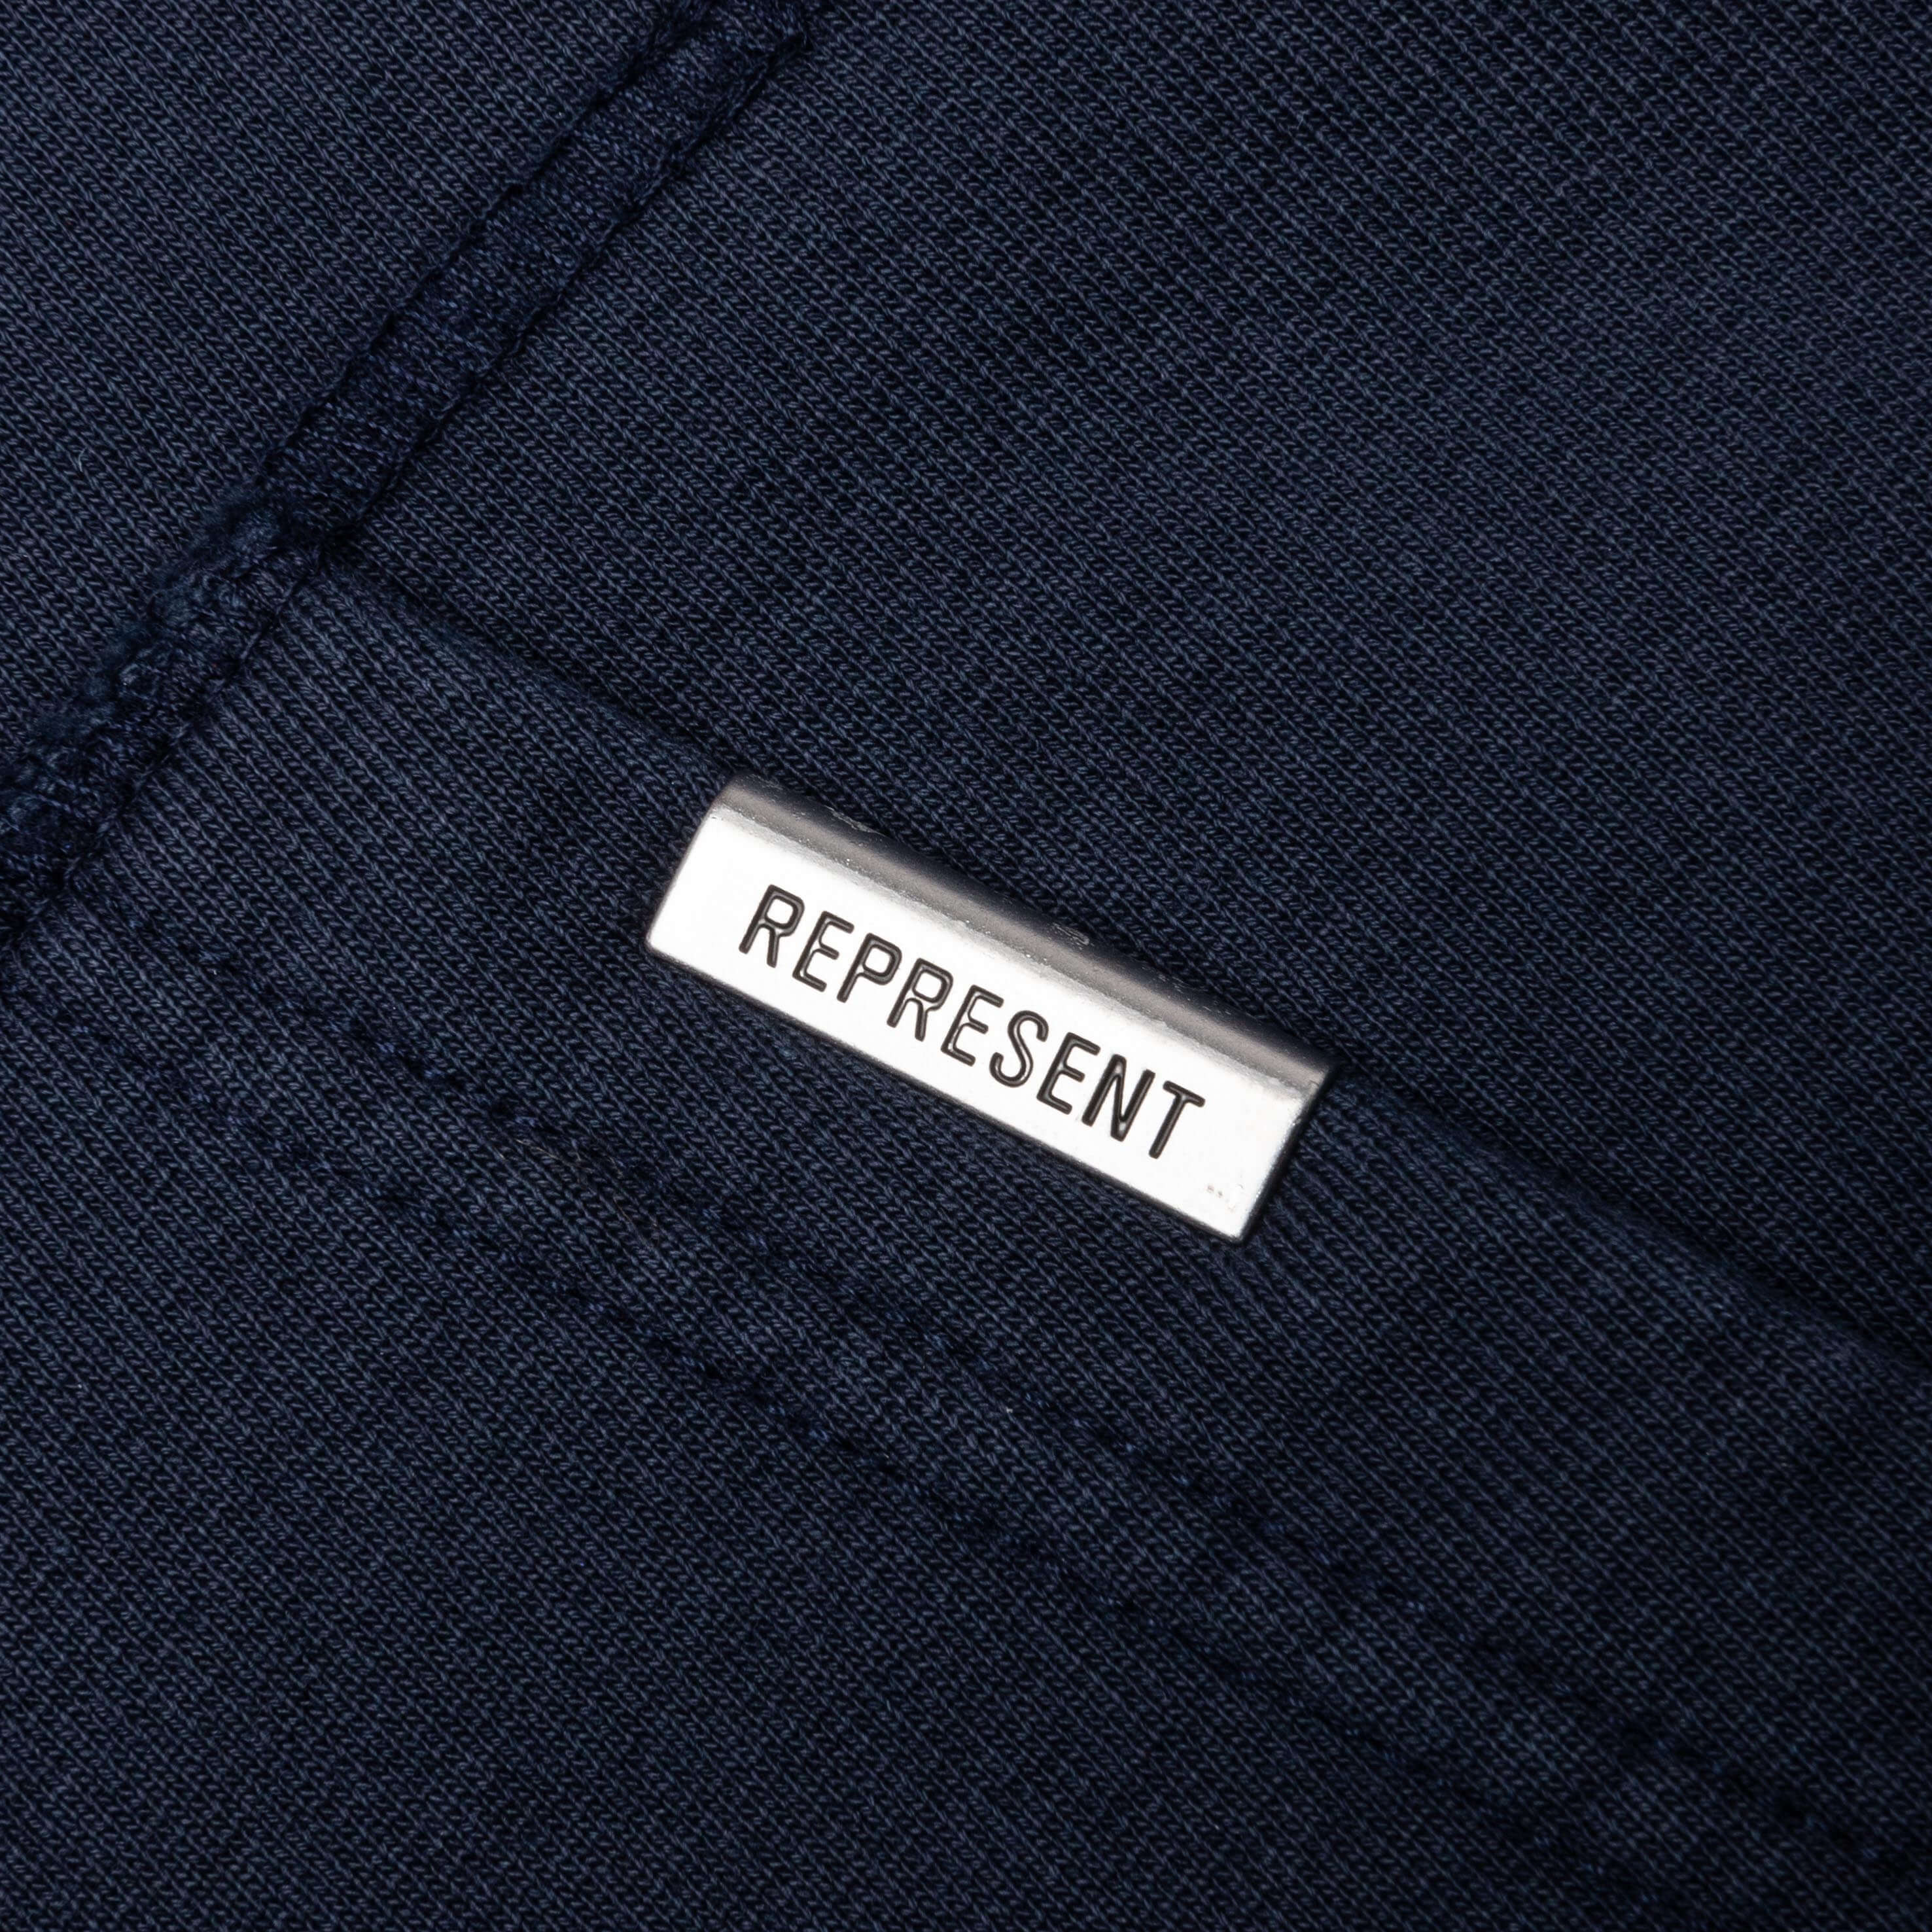 Feature x Represent Champions Hoodie - Midnight Navy, , large image number null